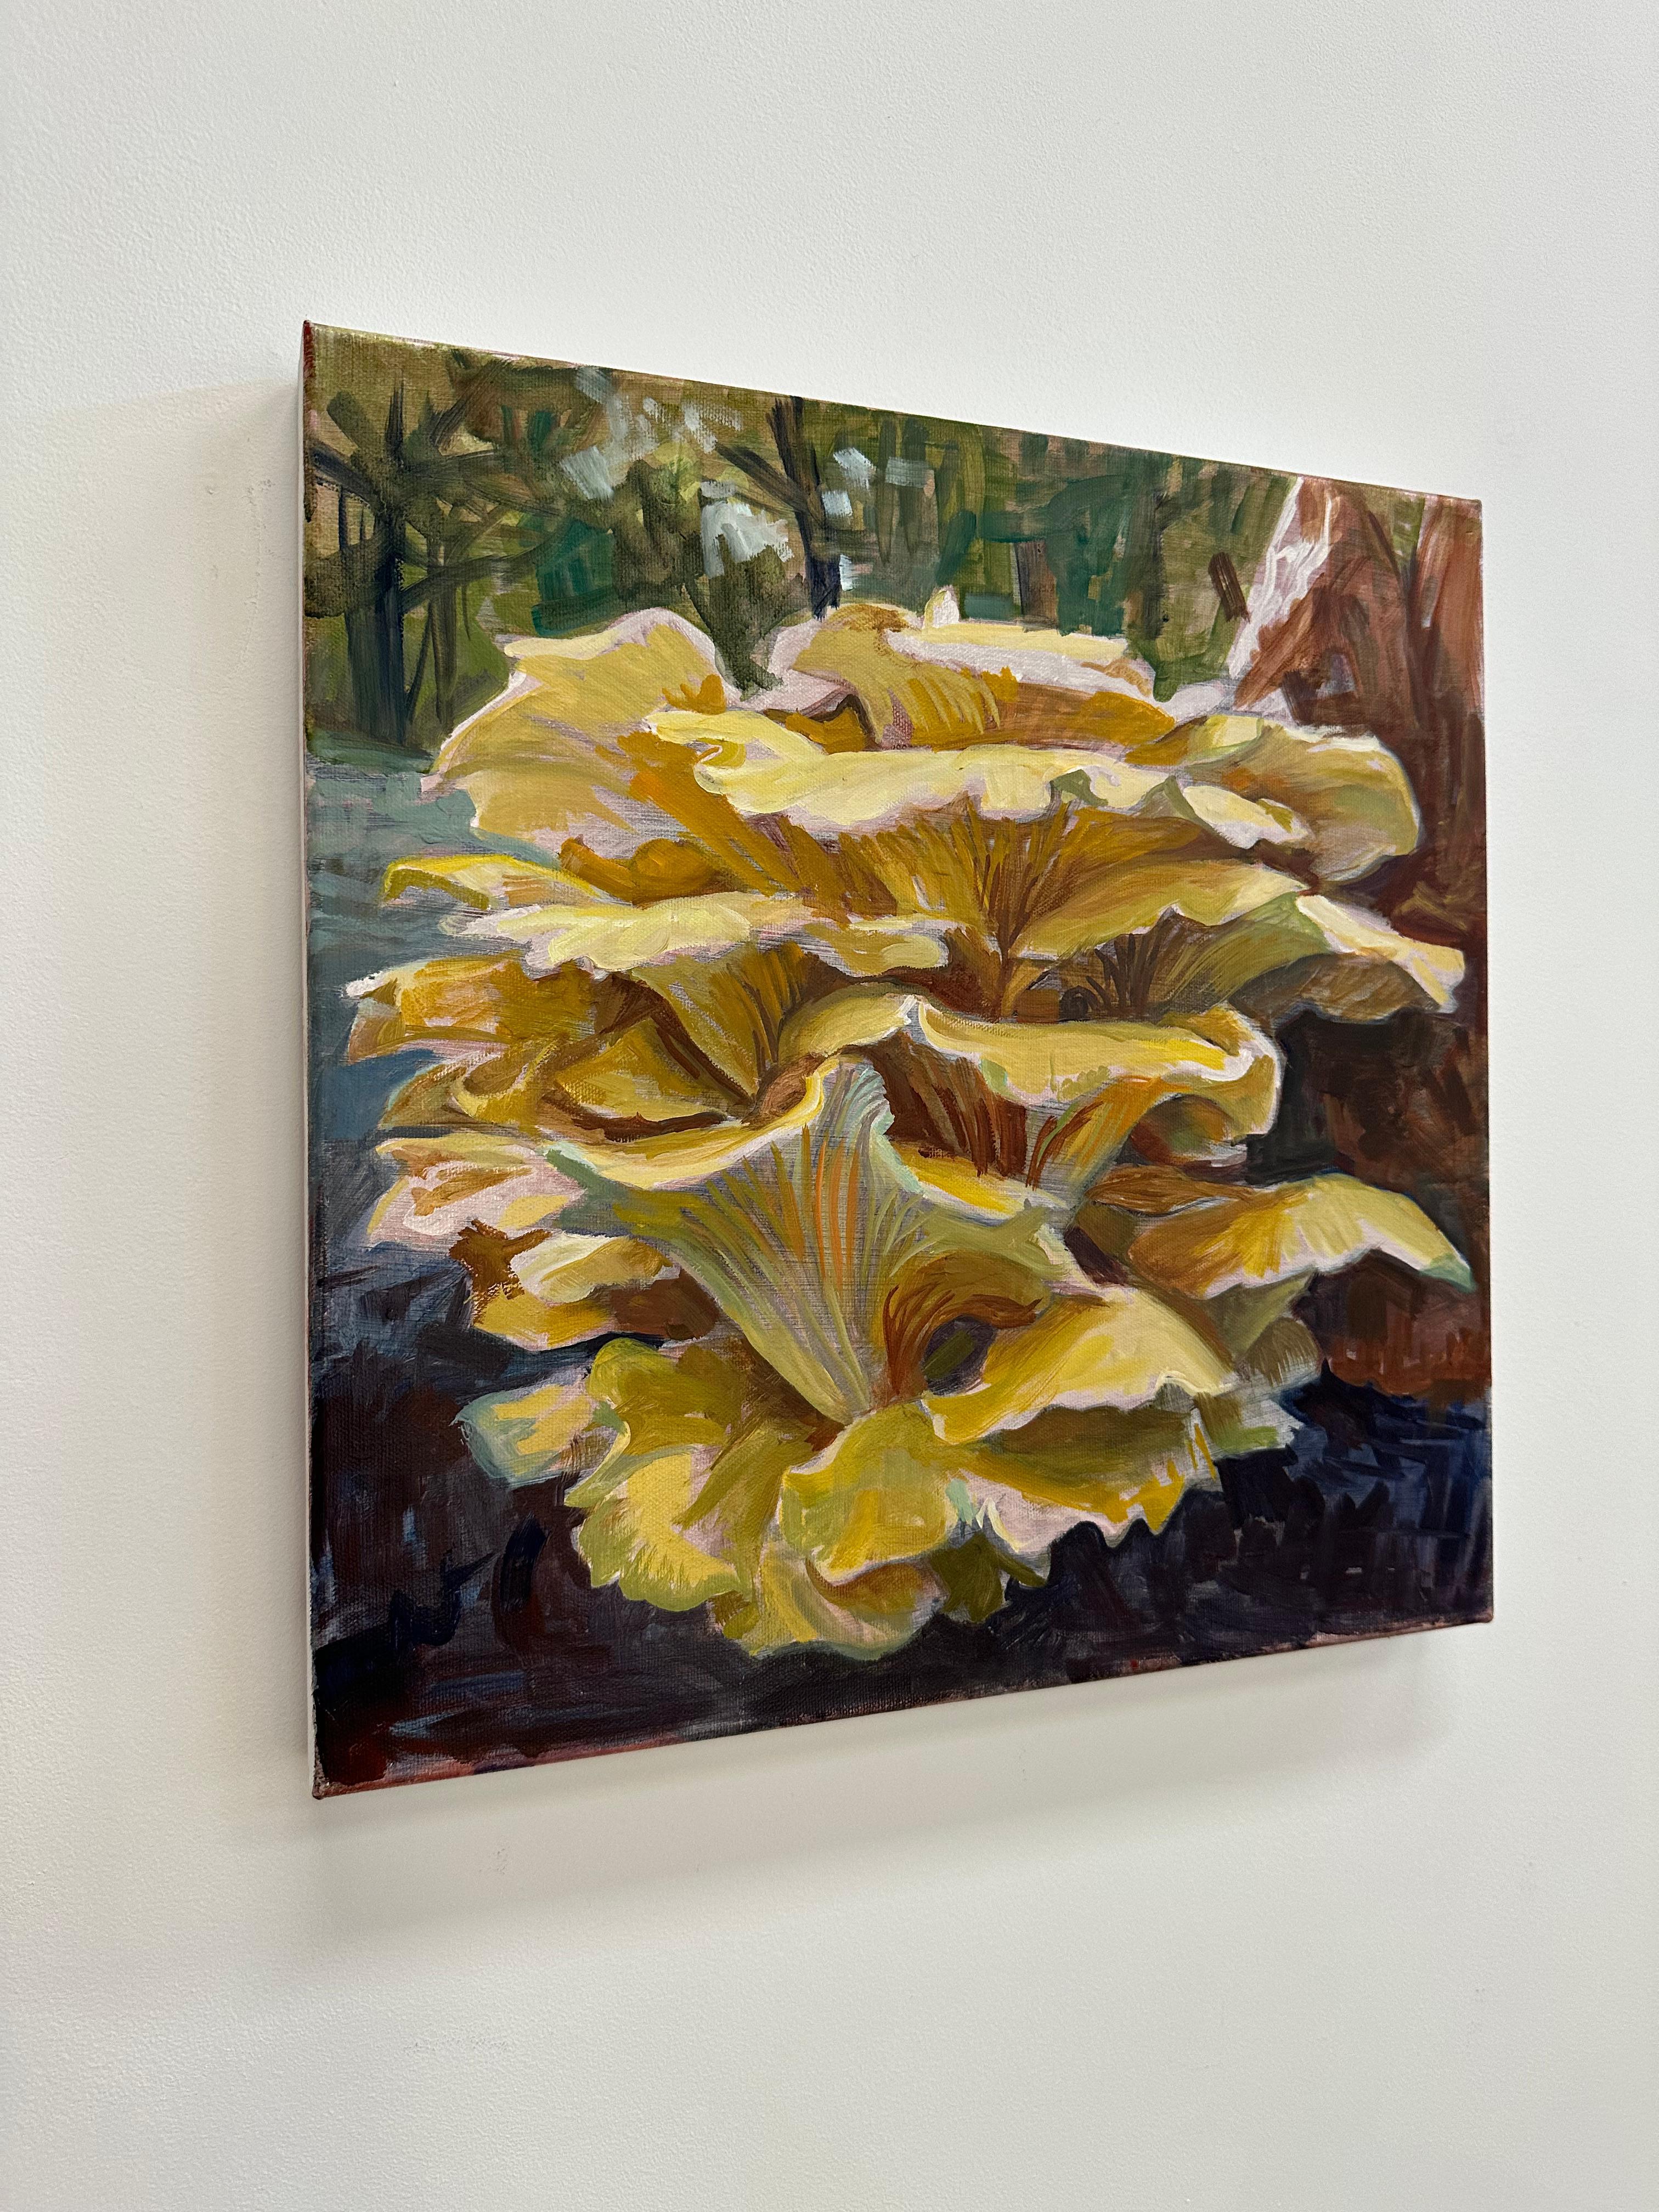 Study for Golden Oysters Two, Mushroom Fungi, Golden Yellow, Ochre, Brown - Contemporary Painting by Andrea Kantrowitz